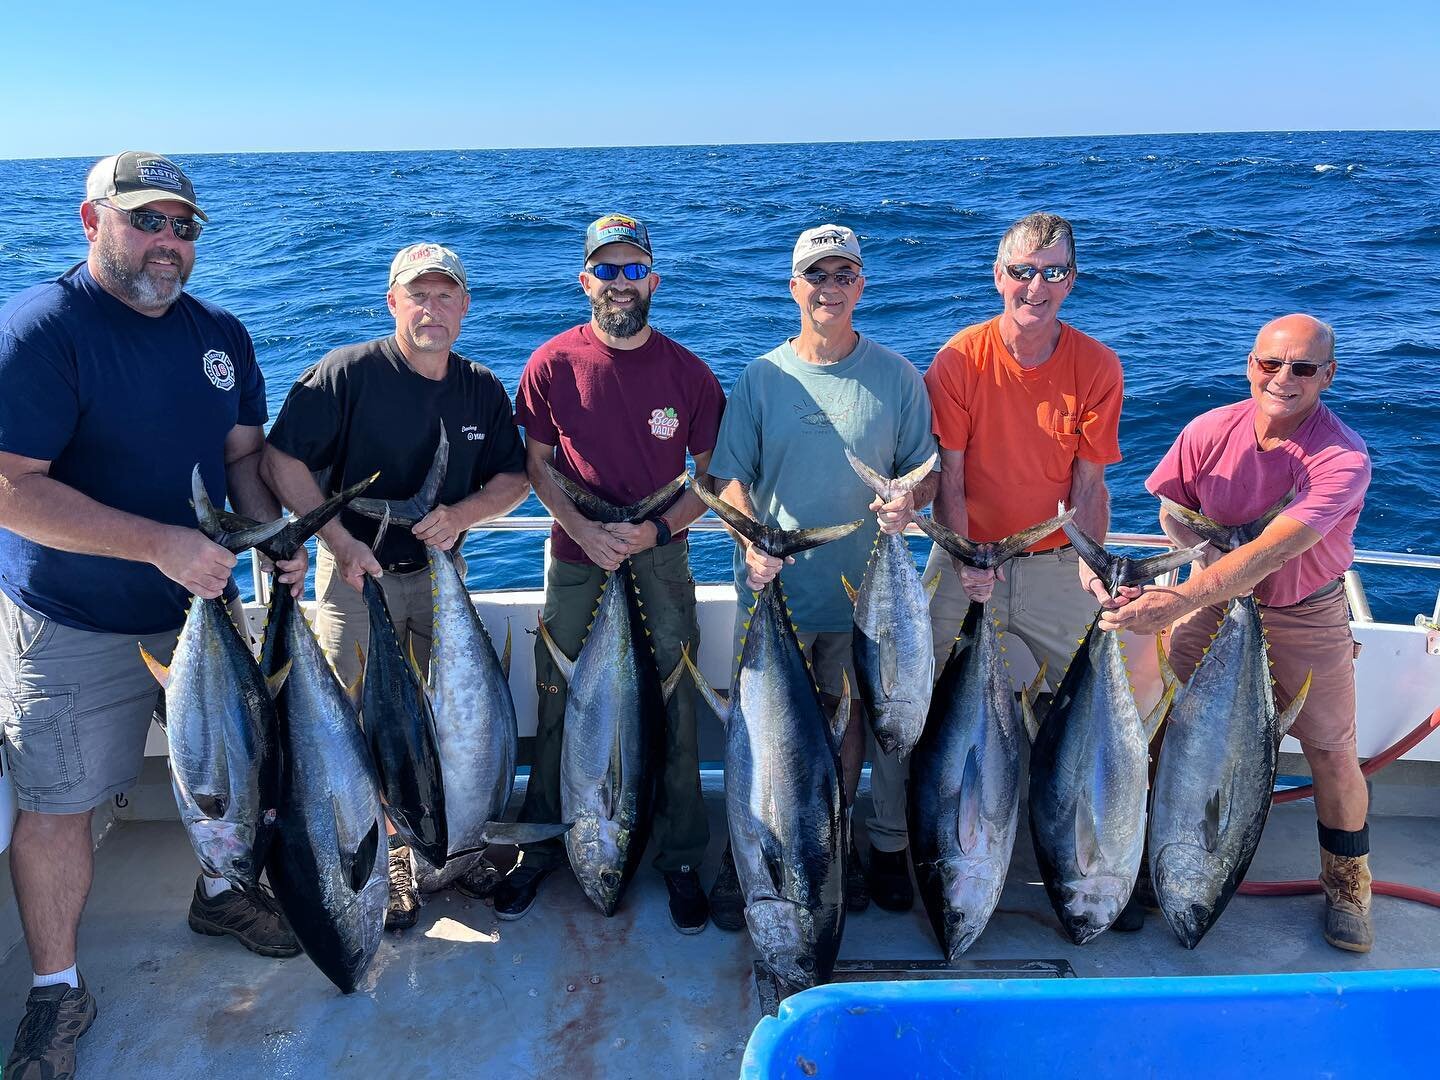 Today was one for the books! The boys from PA were down and tight the entire trip today!!!! For a bunch of tuna virgins they popped some cherrys hard! We started the day out with a double of little guys, spun around made the same pass and doubled up 